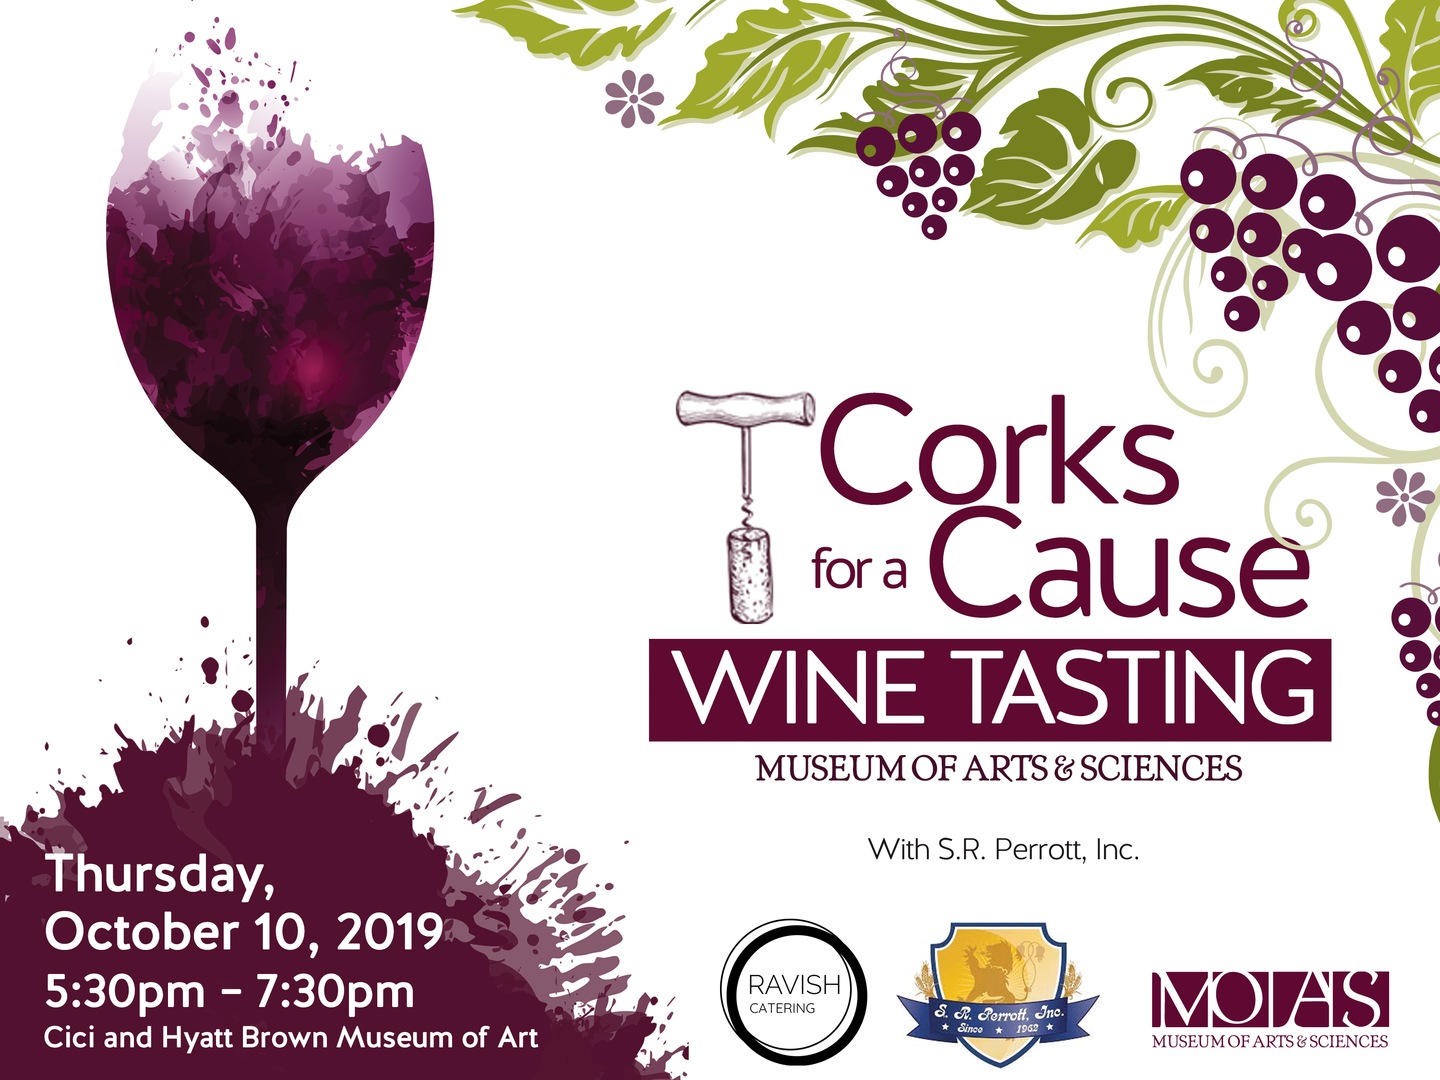 Wine Tasting: Corks for a Cause